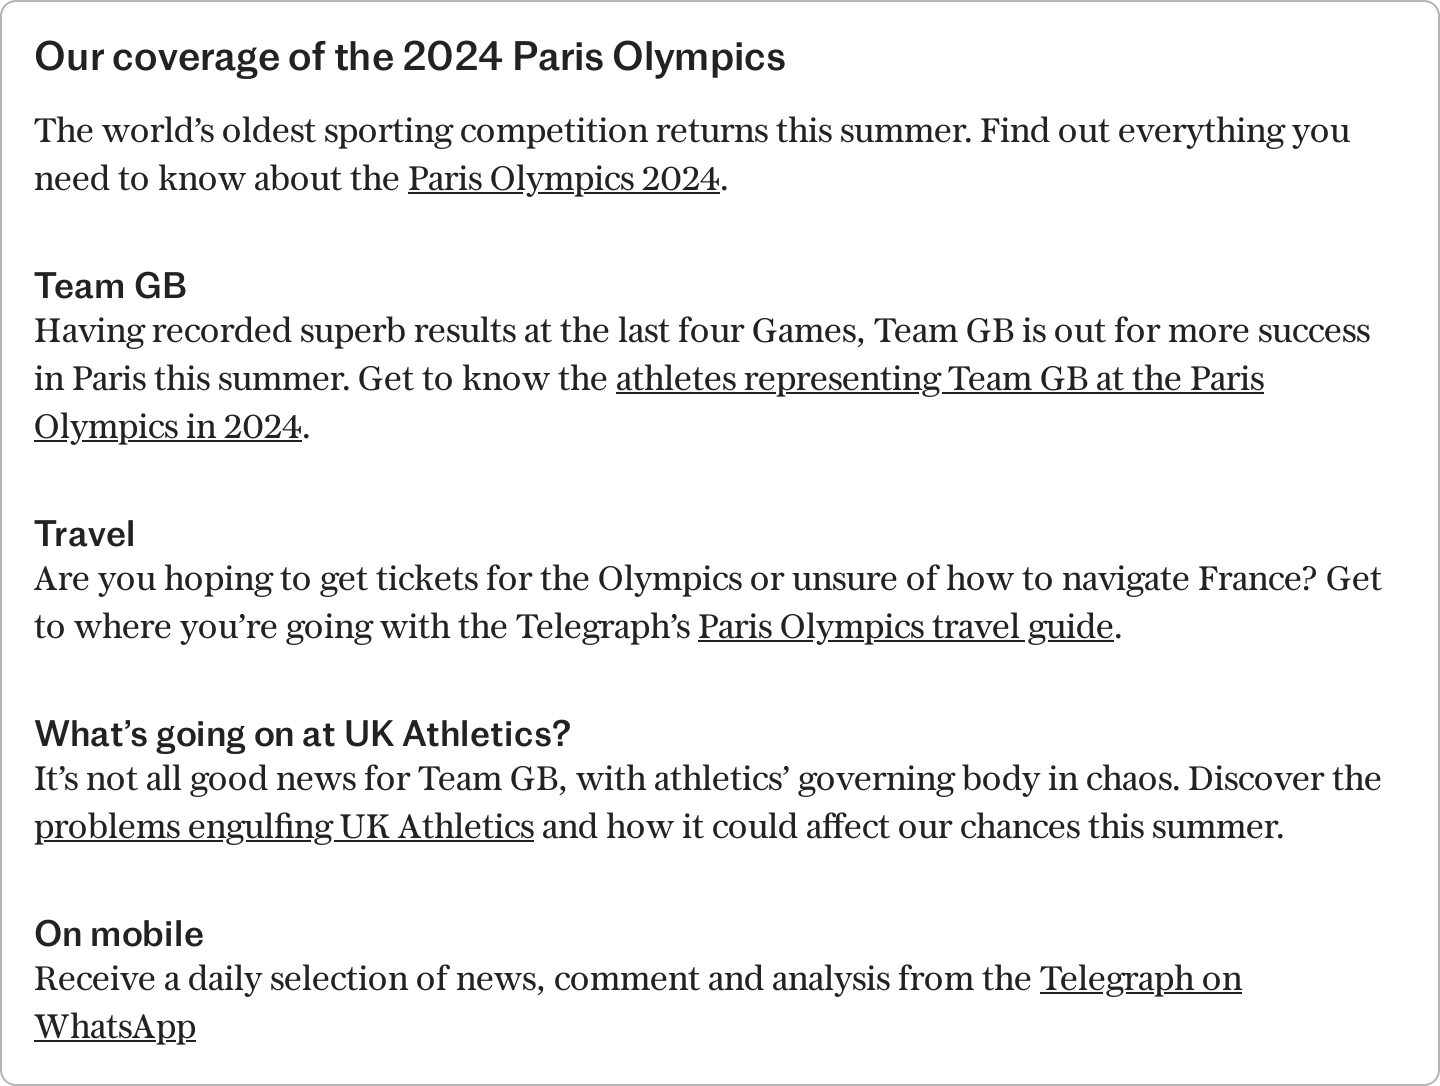 predicted medal table for the paris olympics 2024, including team gb